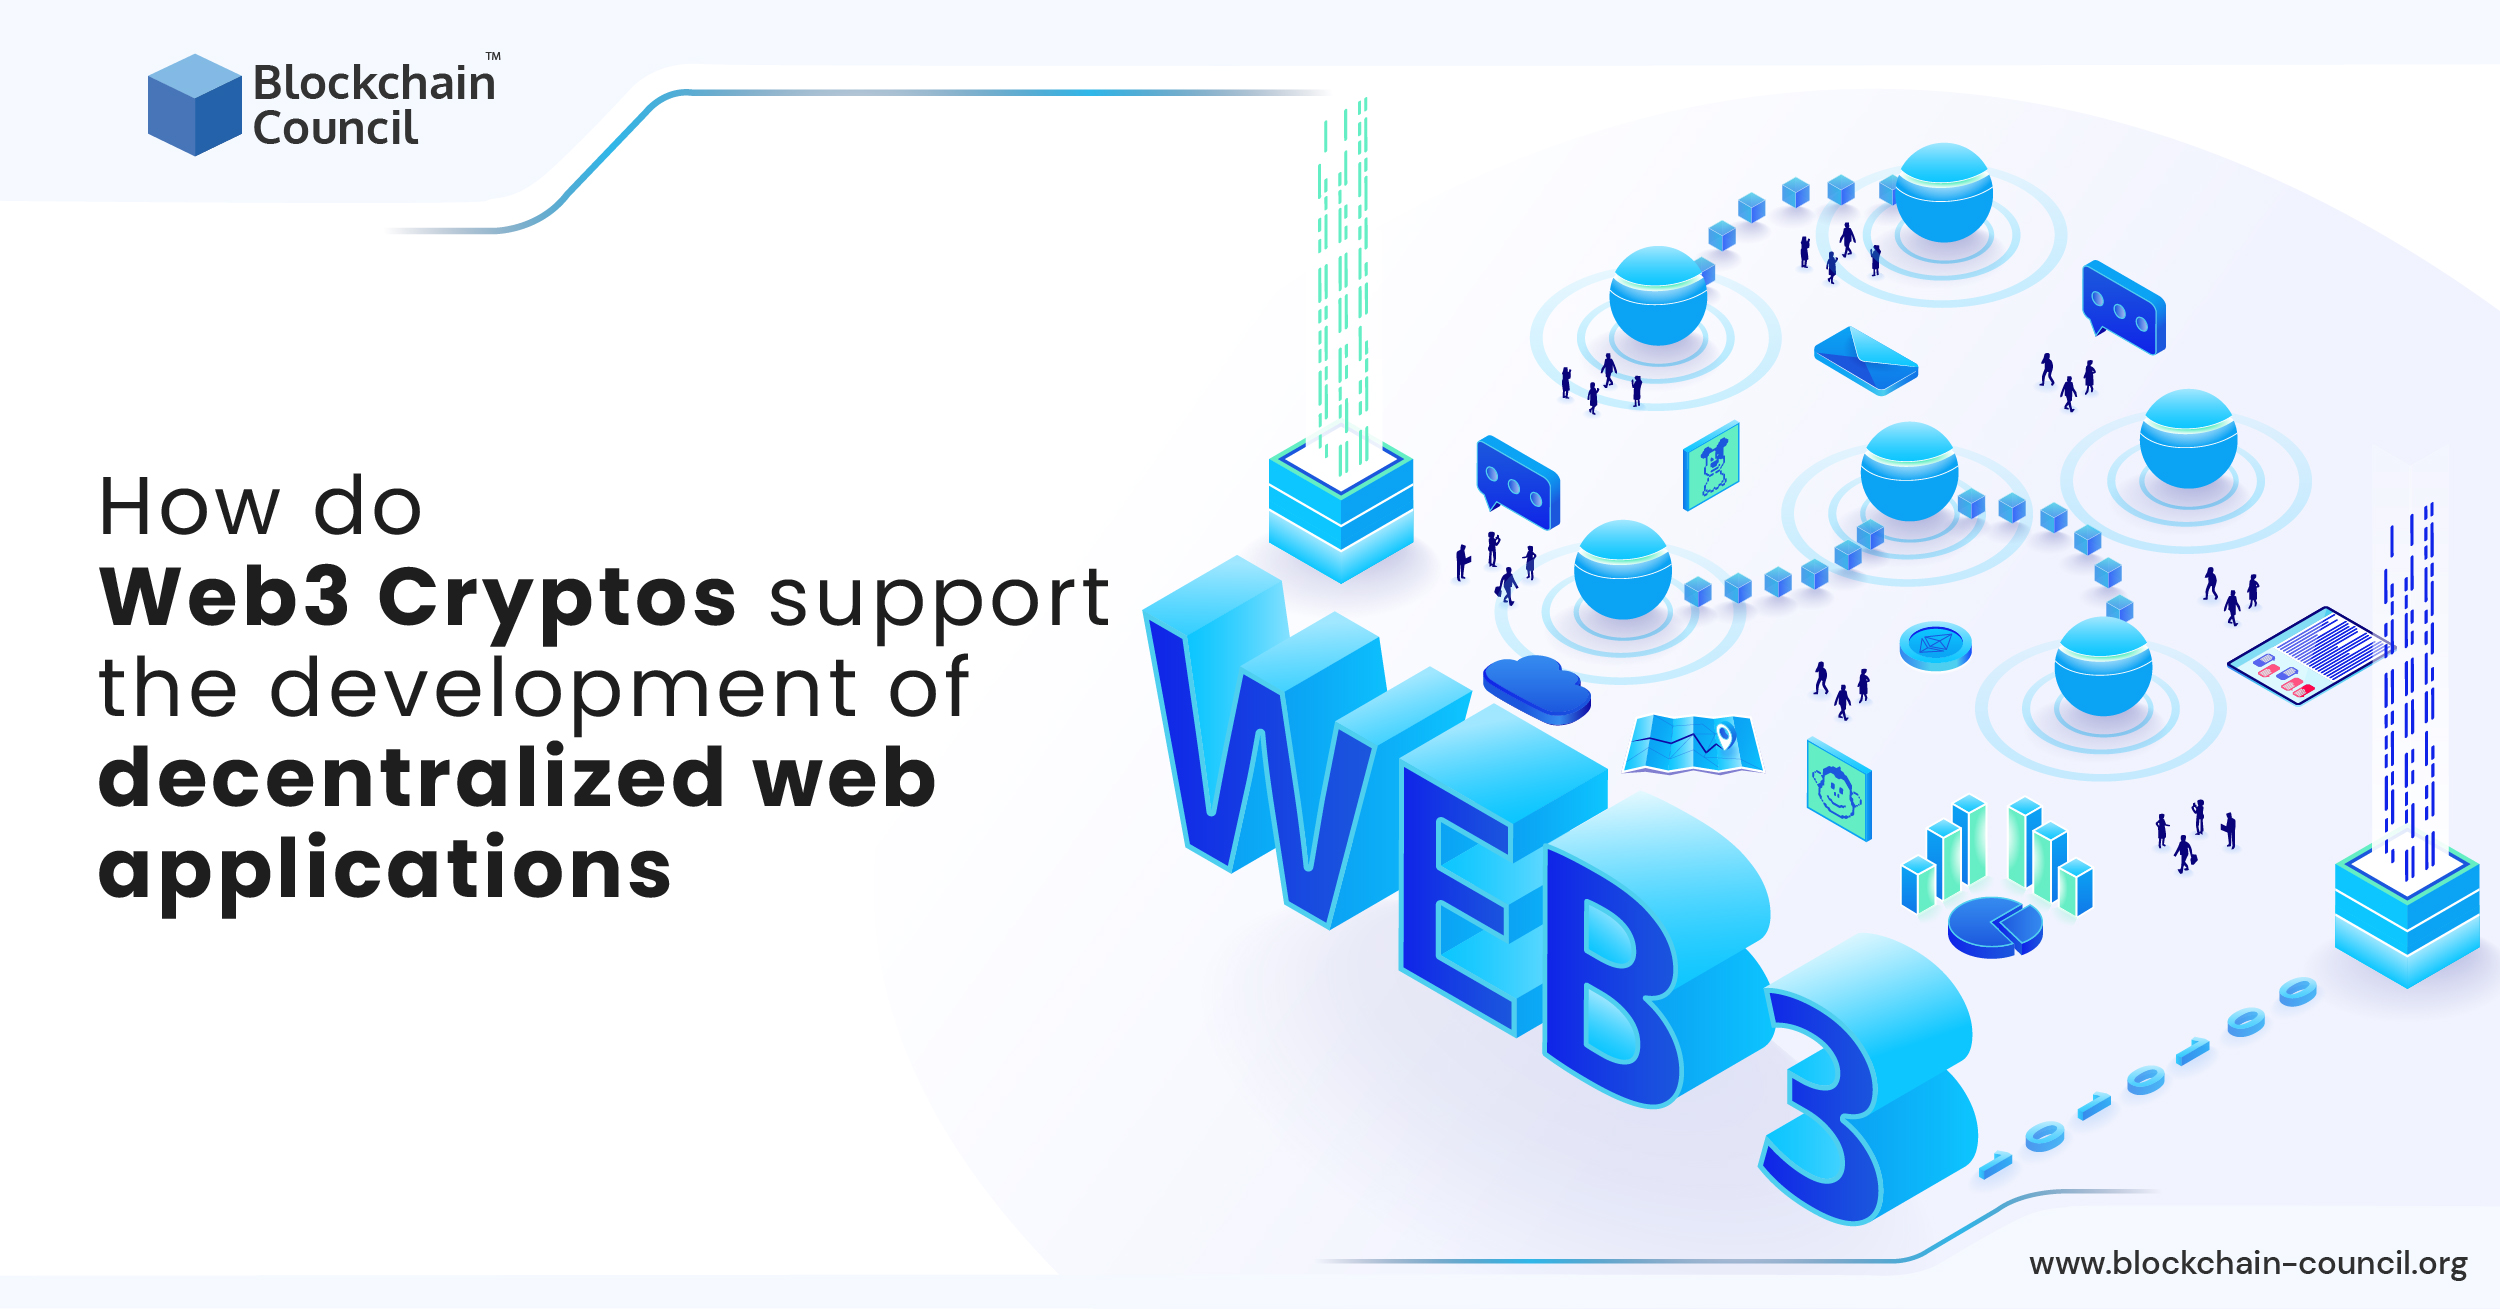 How do Web3 Cryptos support the development of decentralized web applications